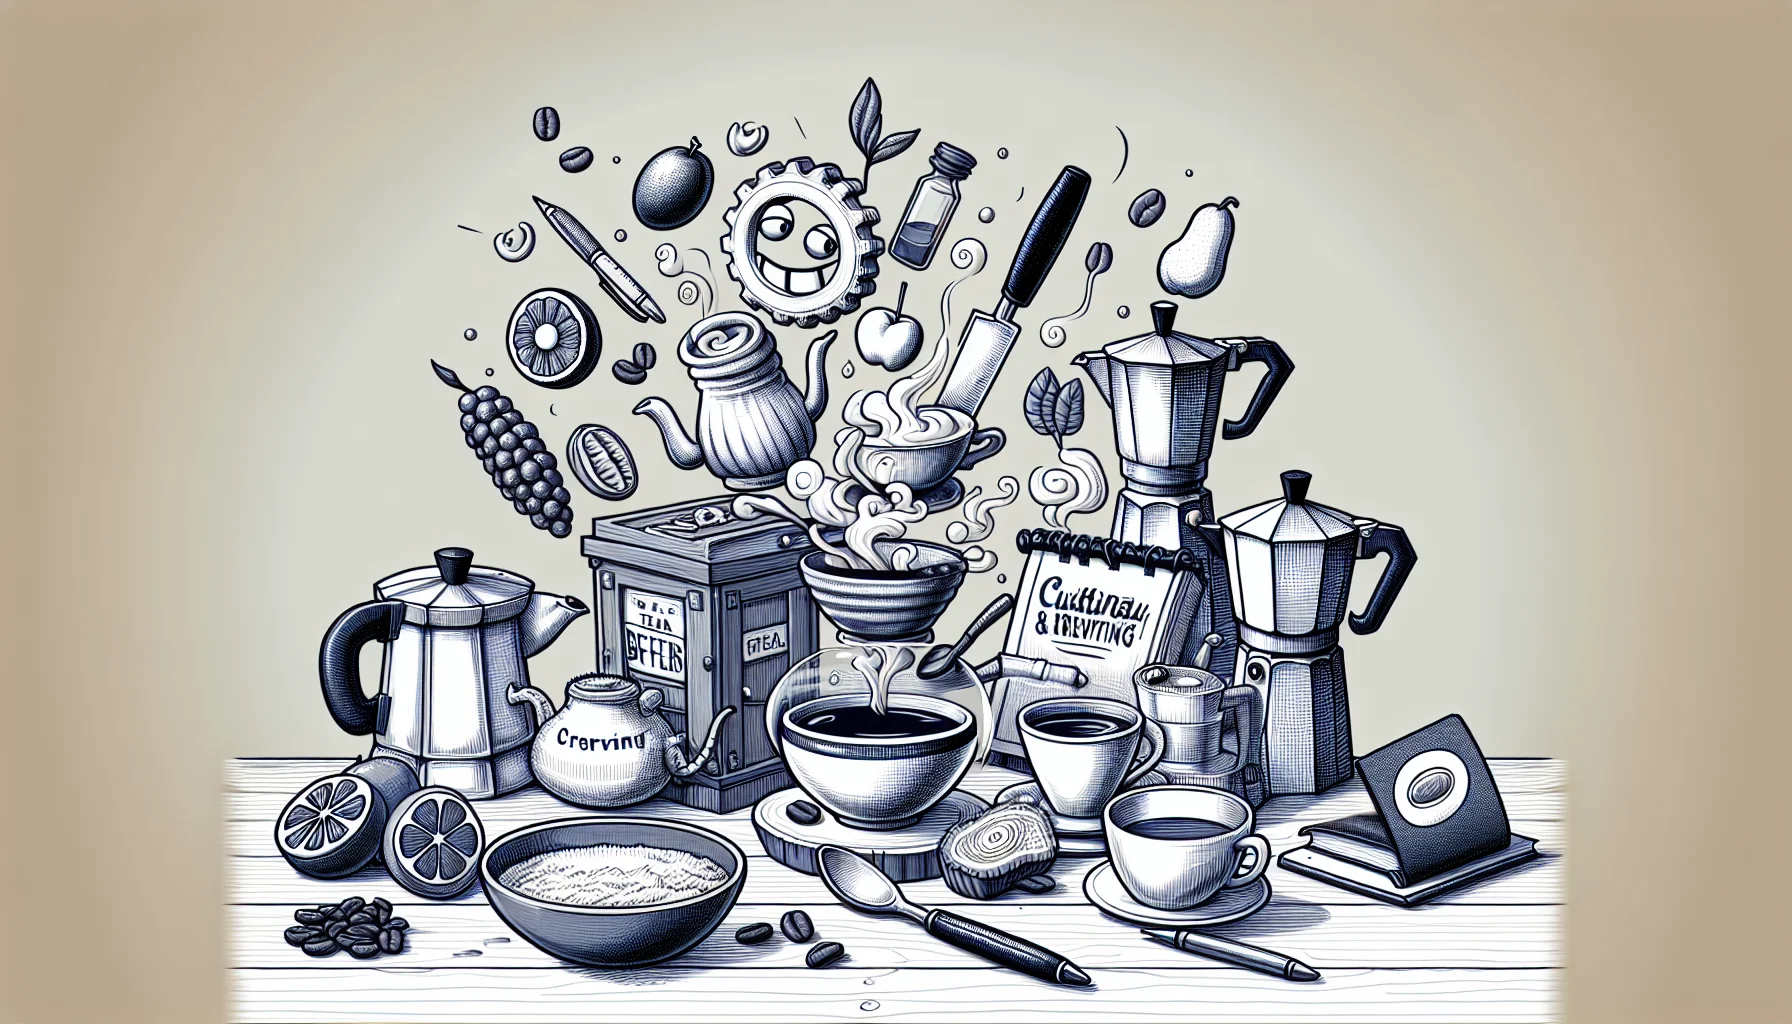 Create a humorous and enticing representation of a 'Culinary Brews: A Food Writing Workshop'. Within this playful scene, there should be an evident focus on the preparation and appreciation of tea and coffee. In the image, there should be a variety of interesting items related to tea and coffee brewing. It should be evident that they are used in the context of a writing workshop exploring food and beverages. The atmosphere should be inviting and filled with joy to show the interactive nature of the workshop.